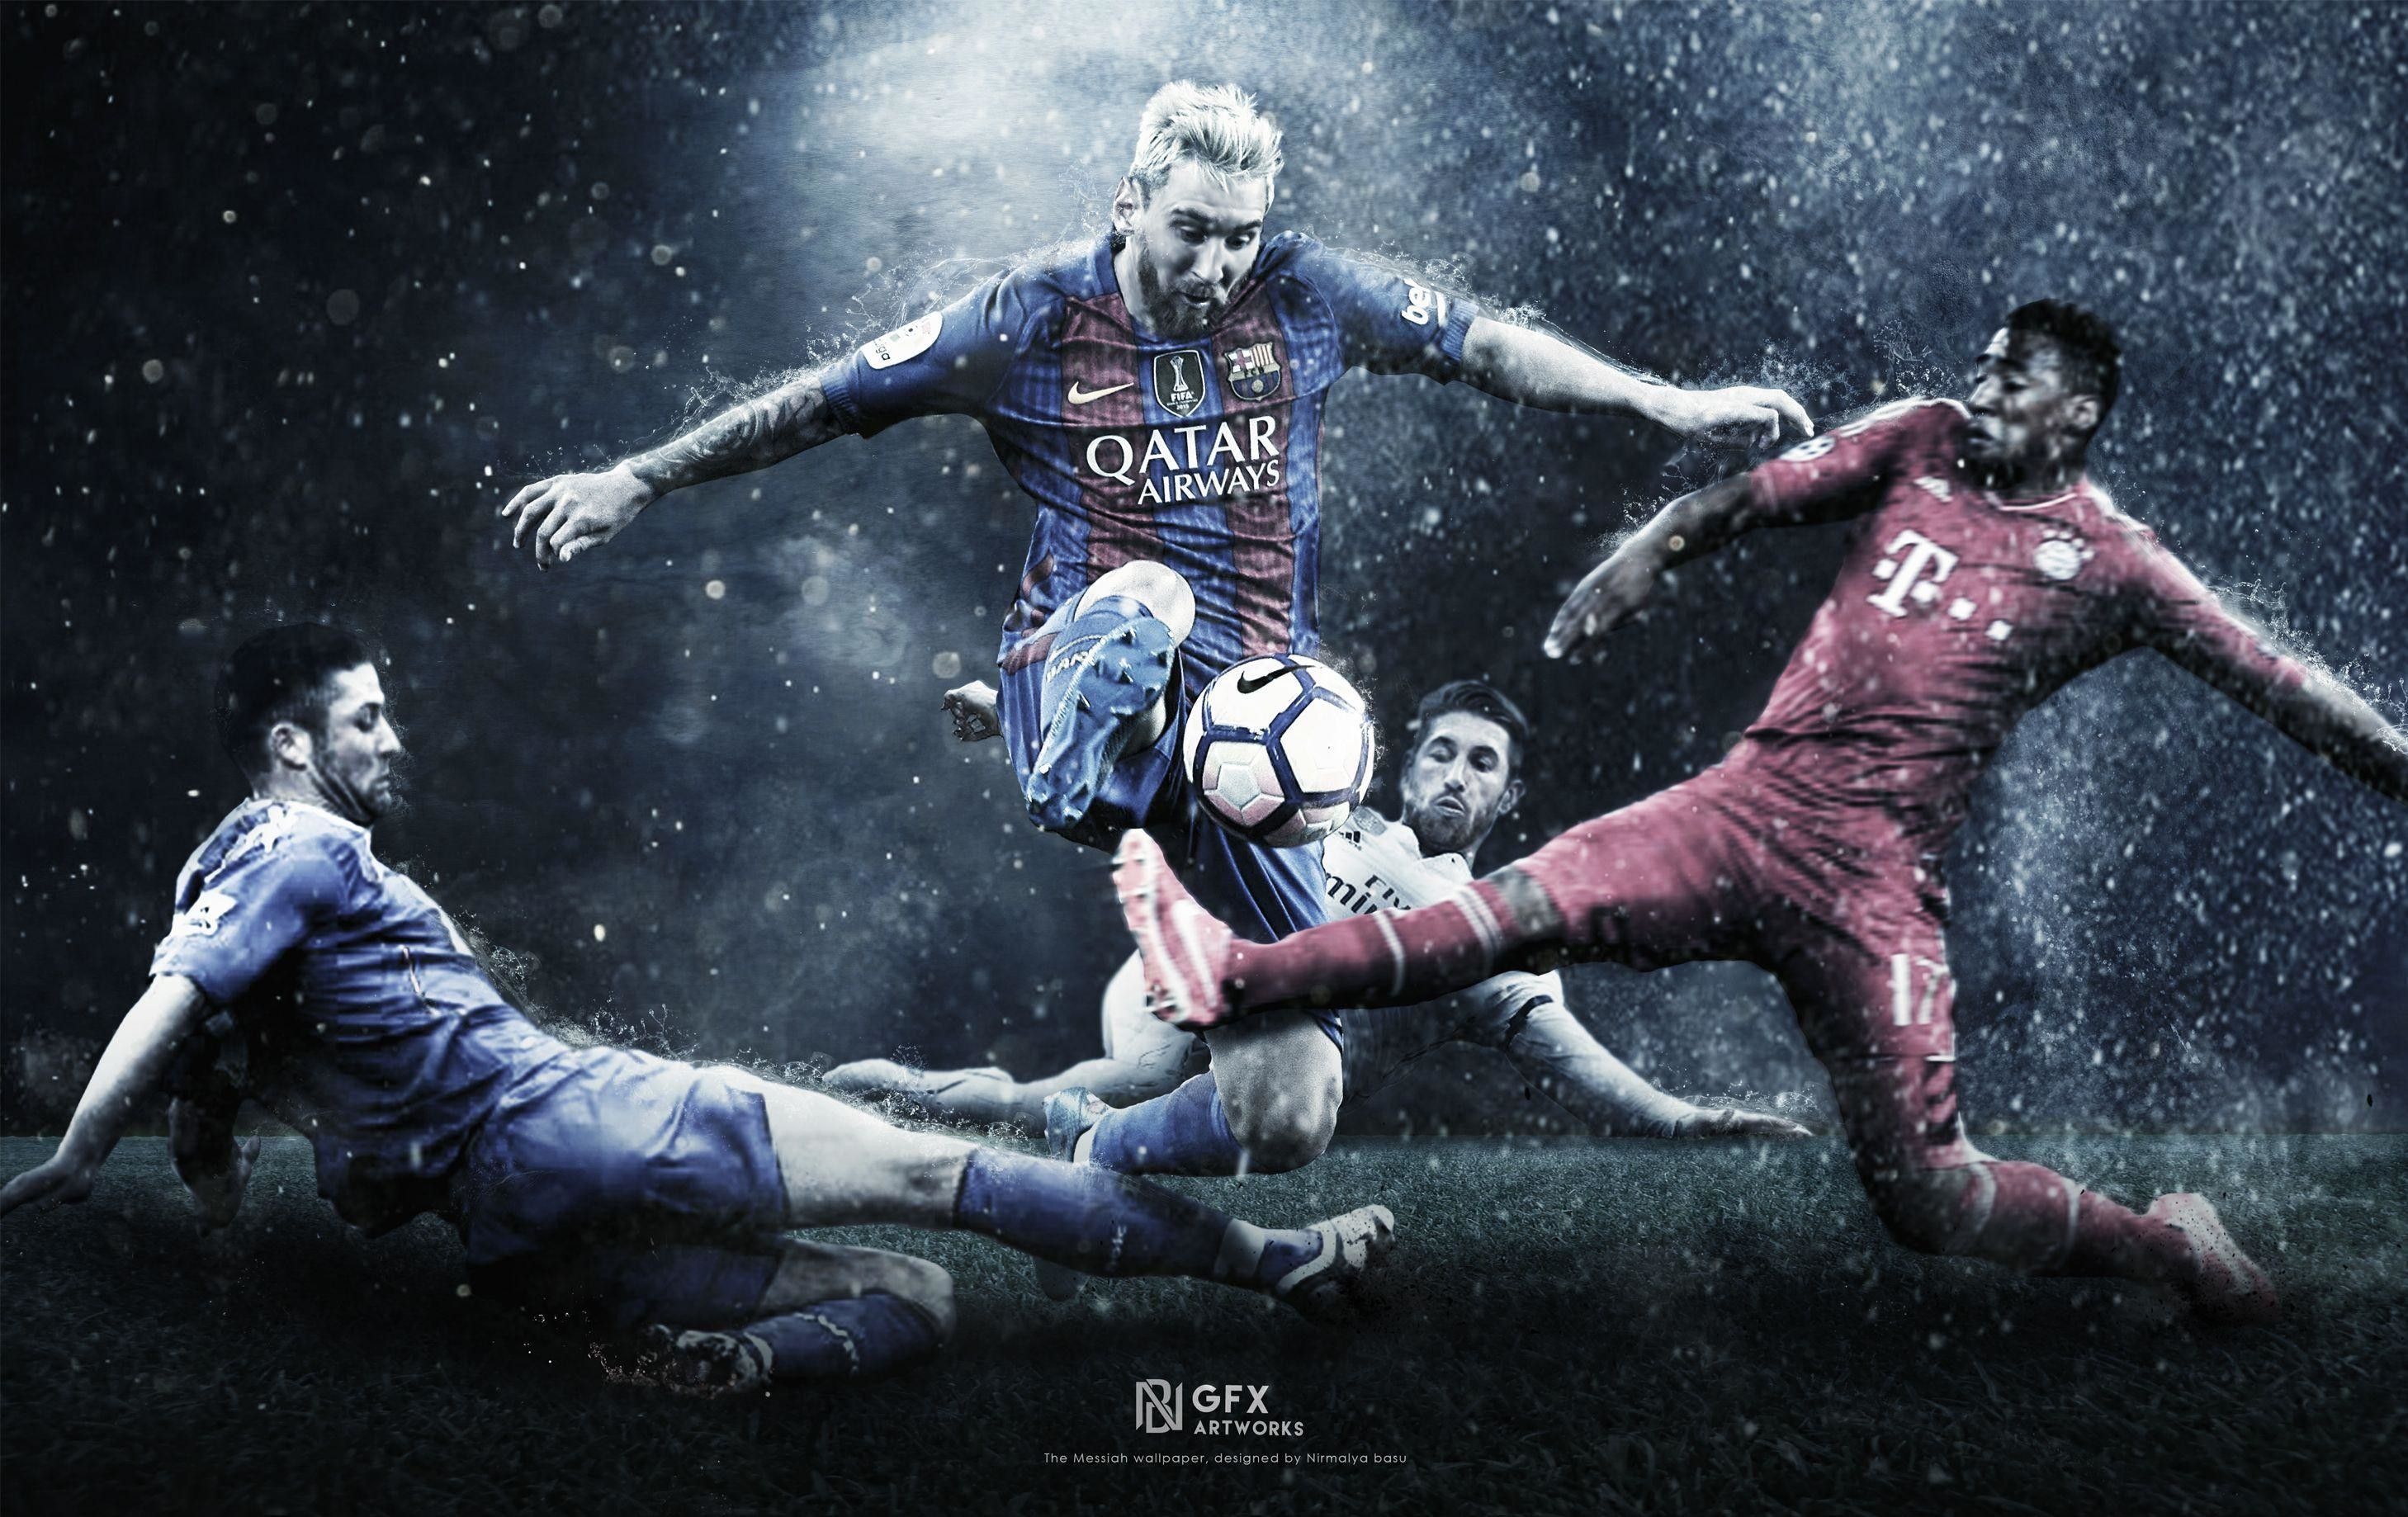 Lionel Messi Wallpaper For Laptop